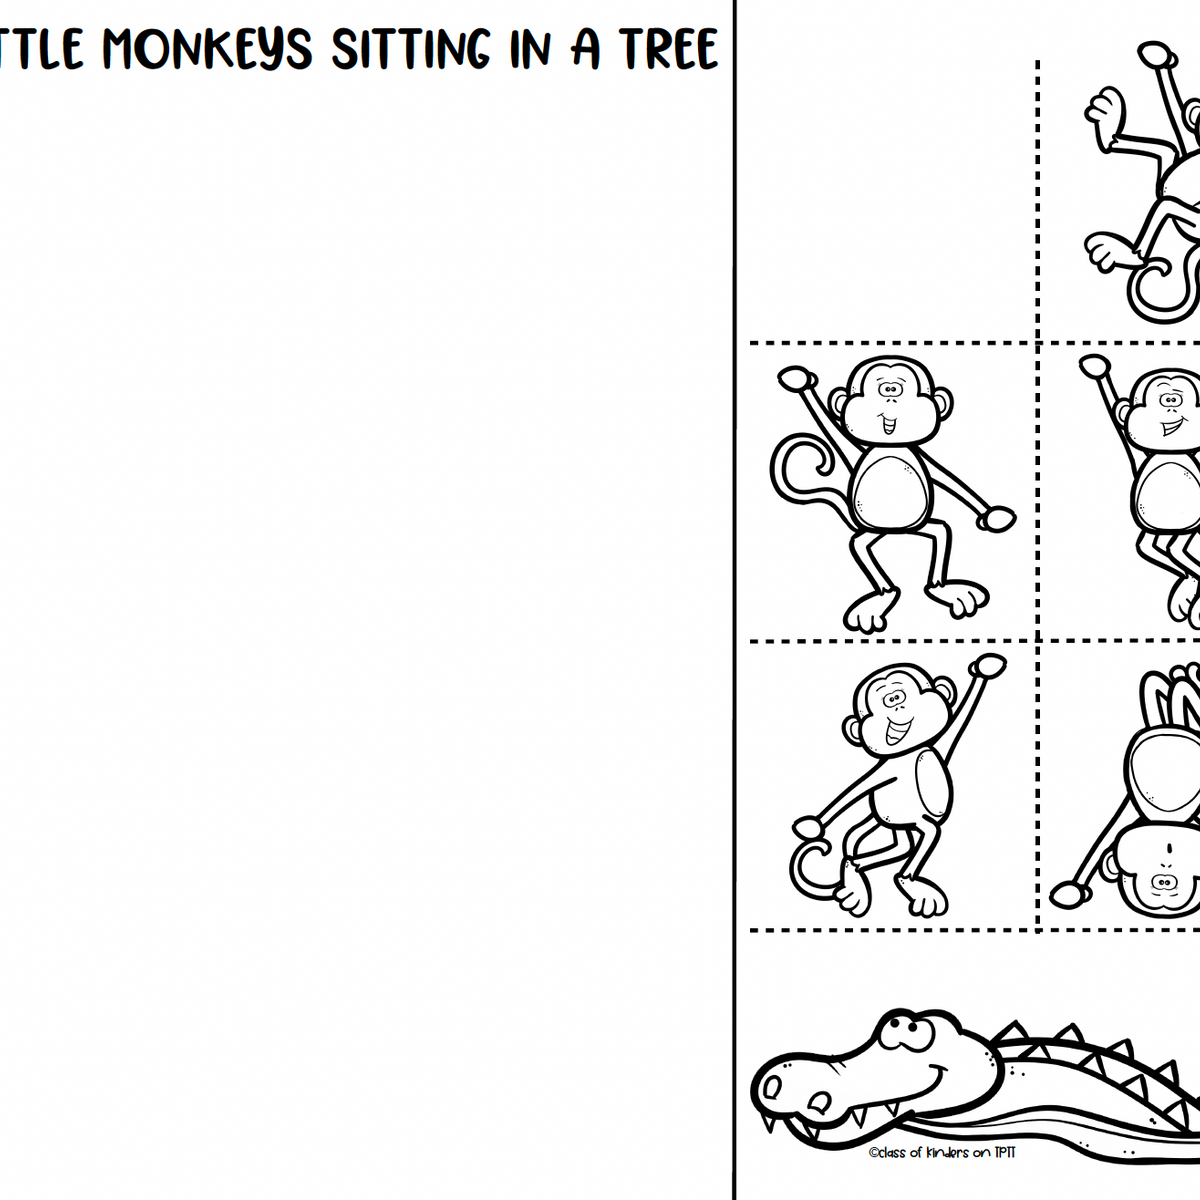 5 Little Monkeys Sitting in a Tree (Storyboard) Math: Decomposing Number Lesson